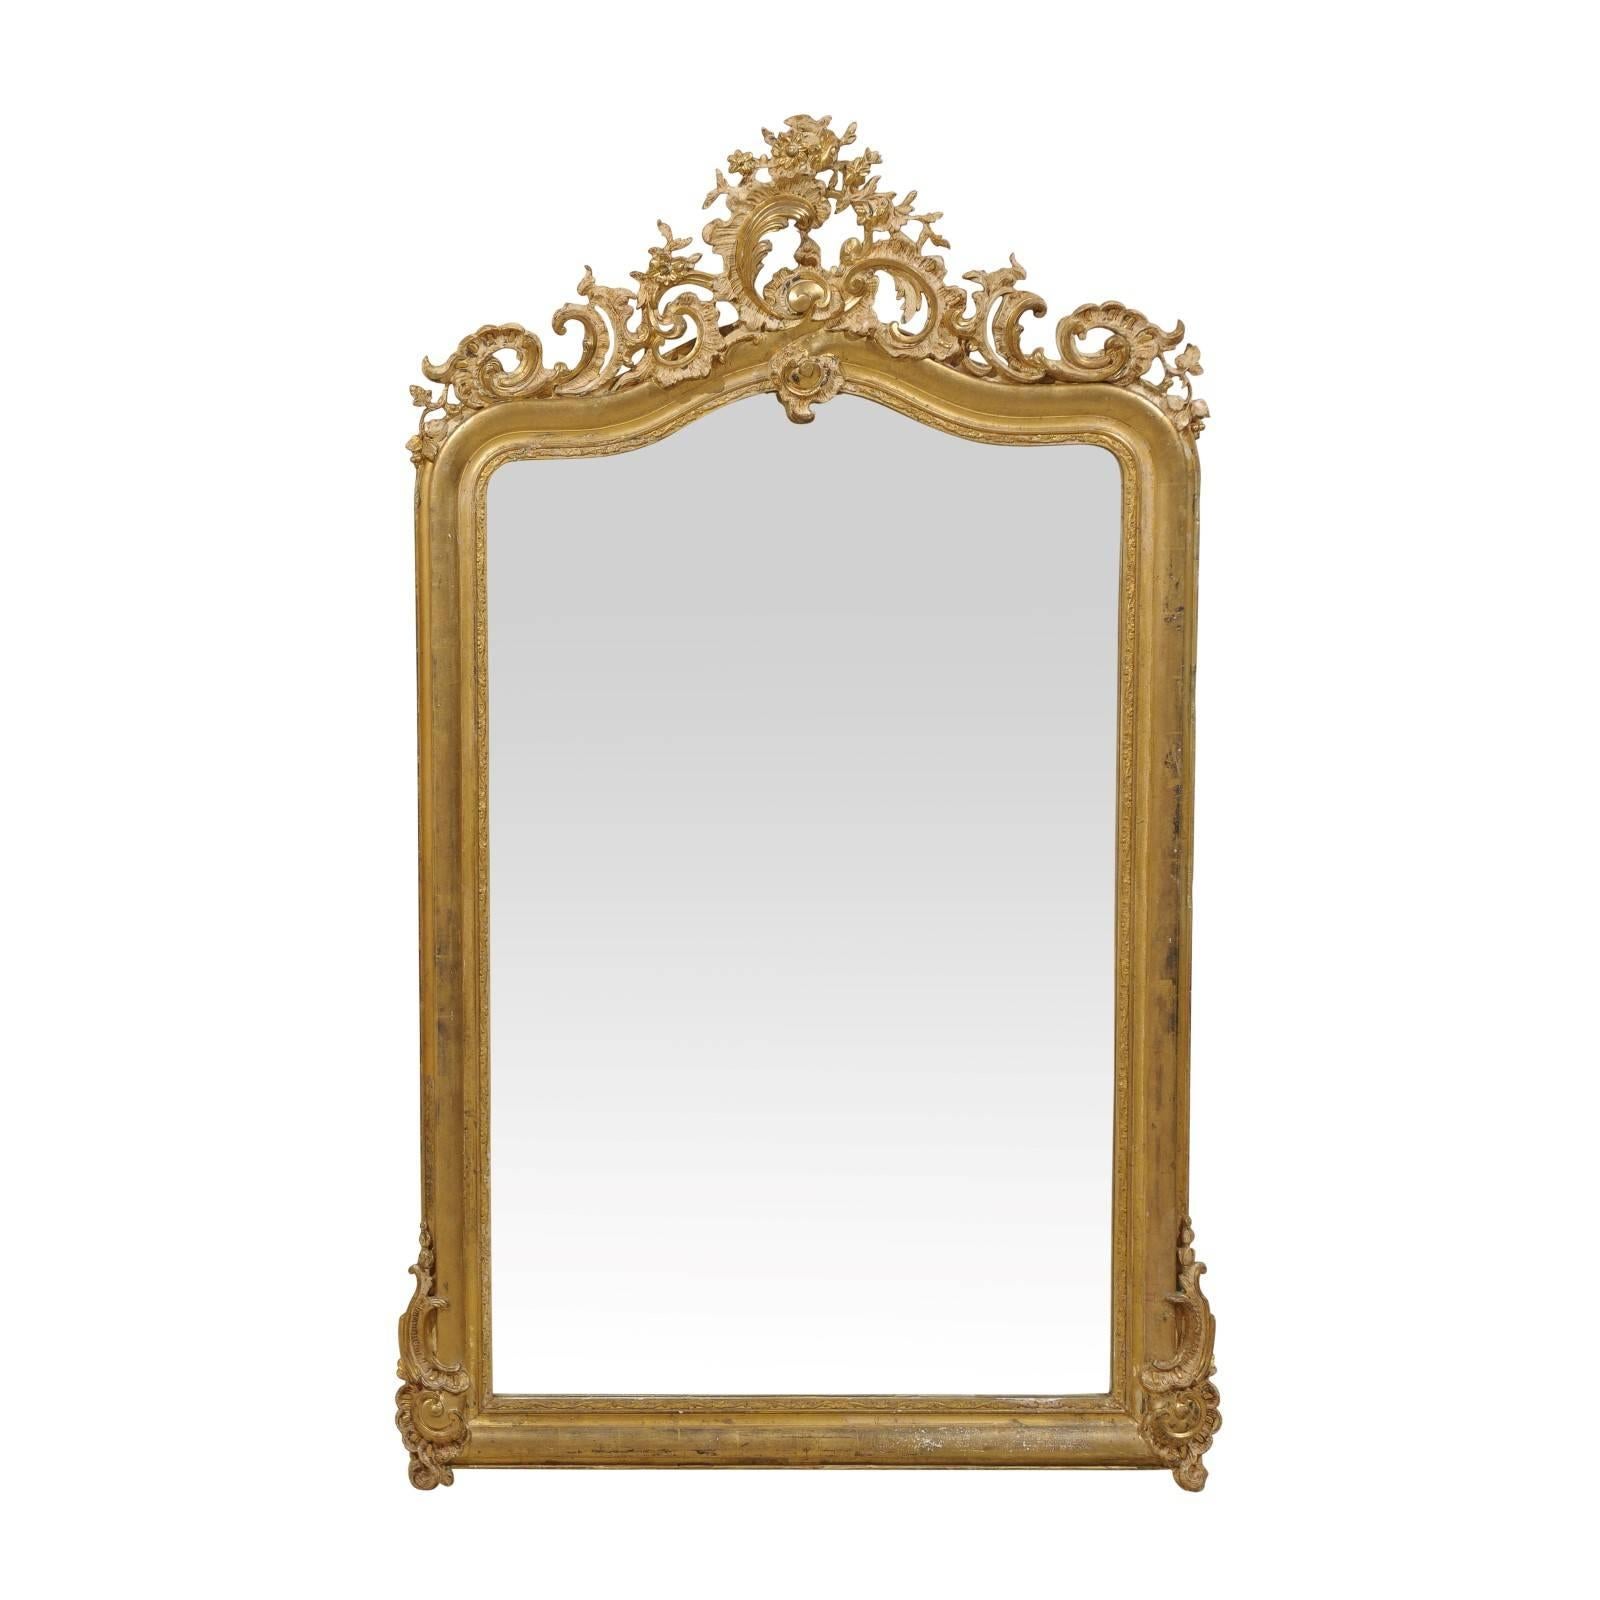 French Rococo Style Gilt Wood Mirror with Ornately Carved Crest, Mid 19th C.